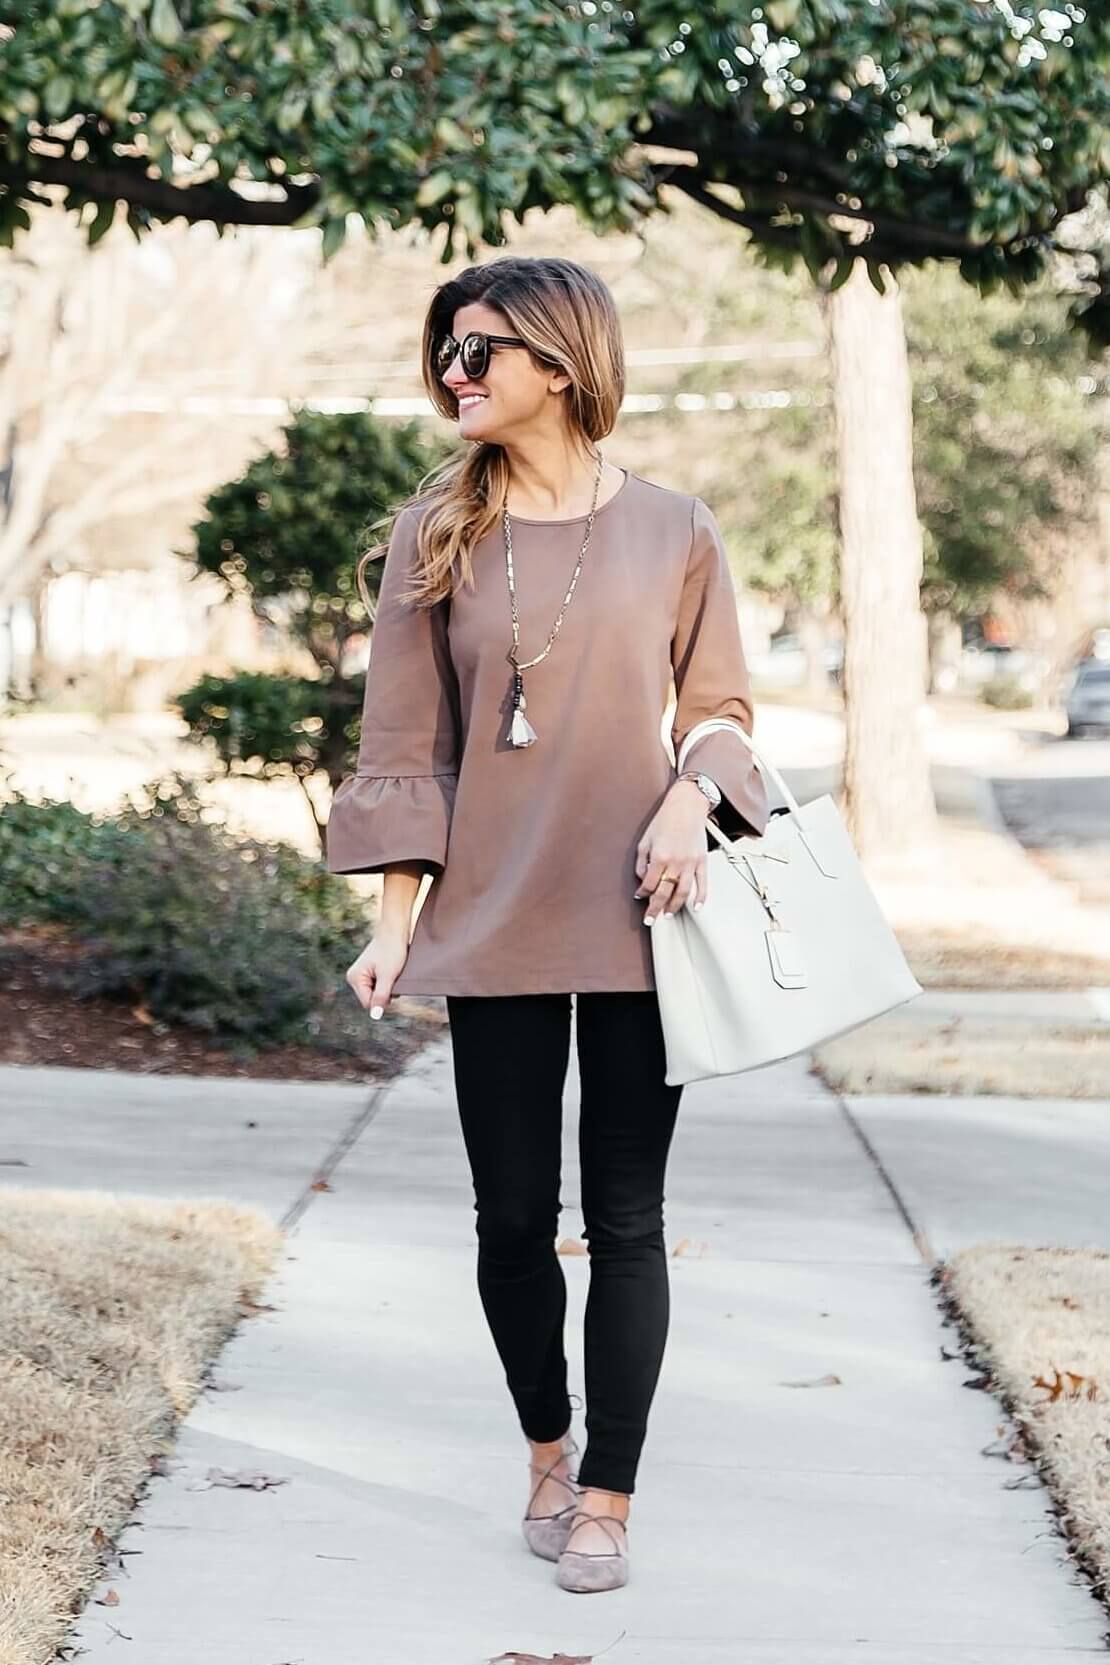 brighton the day peplum sleeve top and black pants with Stewart Weitzman lace up flats